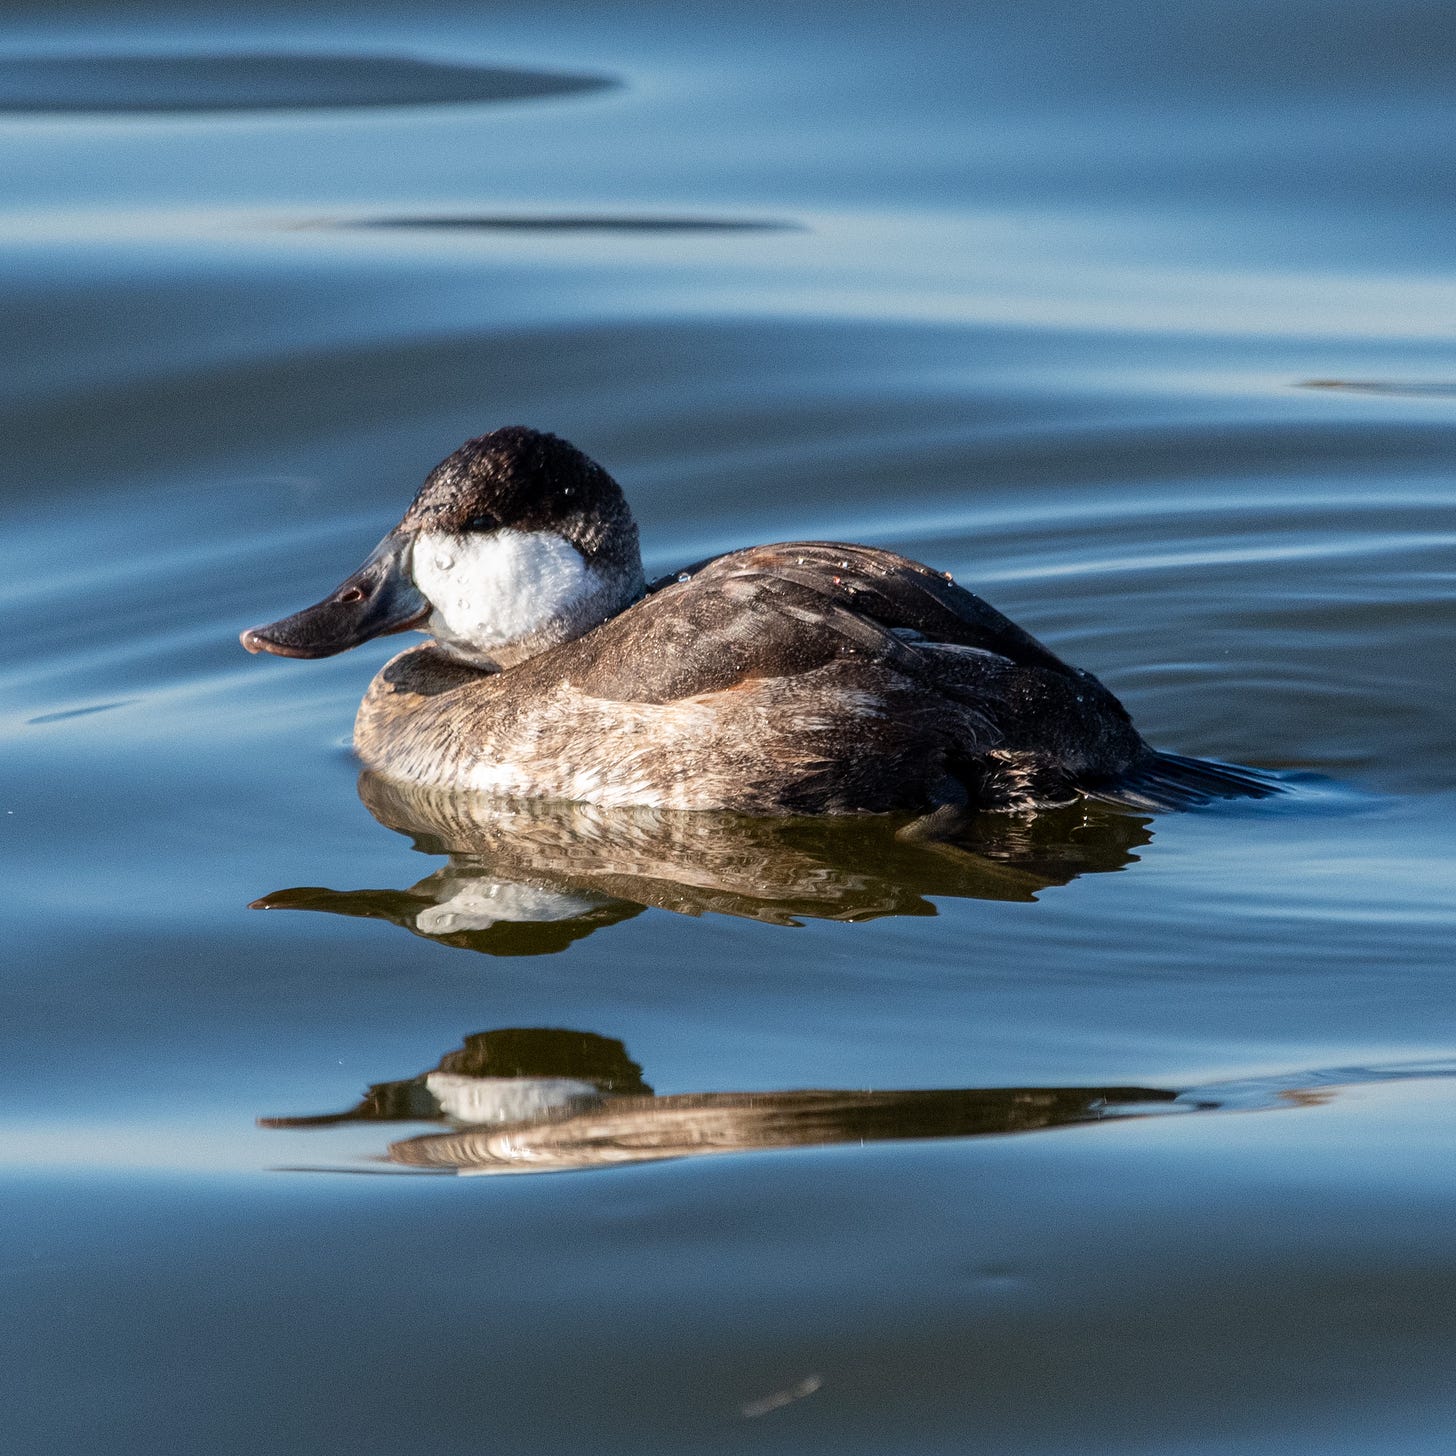 A ruddy duck, reflected and double-reflected in the water that it swims upon